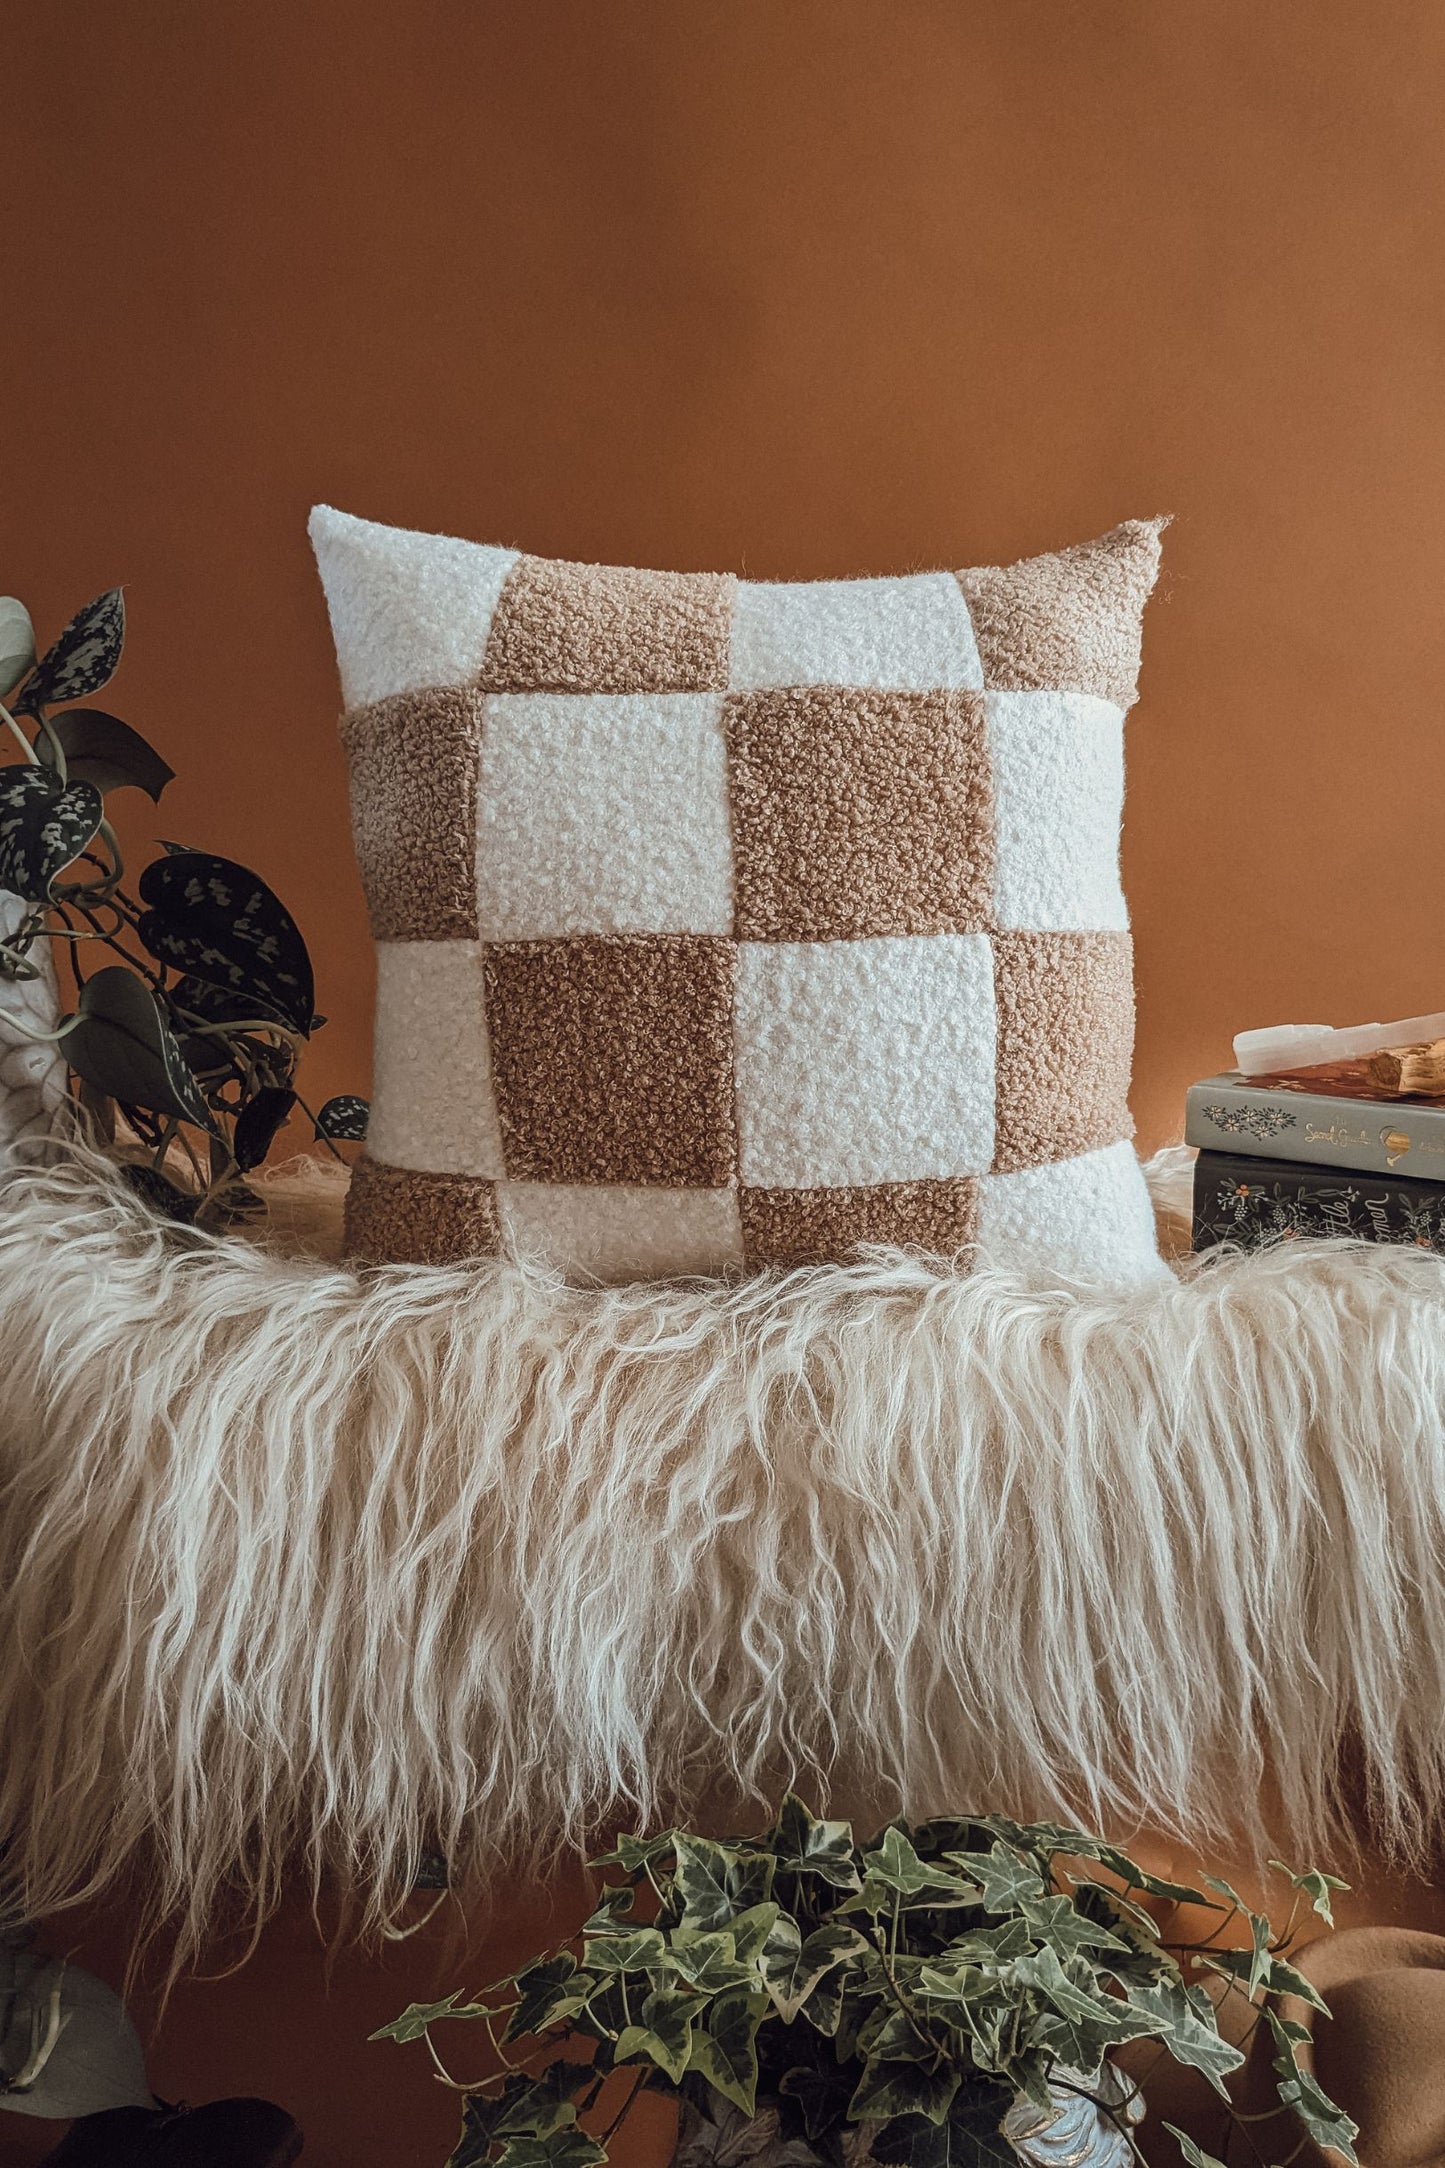 'Cozy Couch Check' Cushion